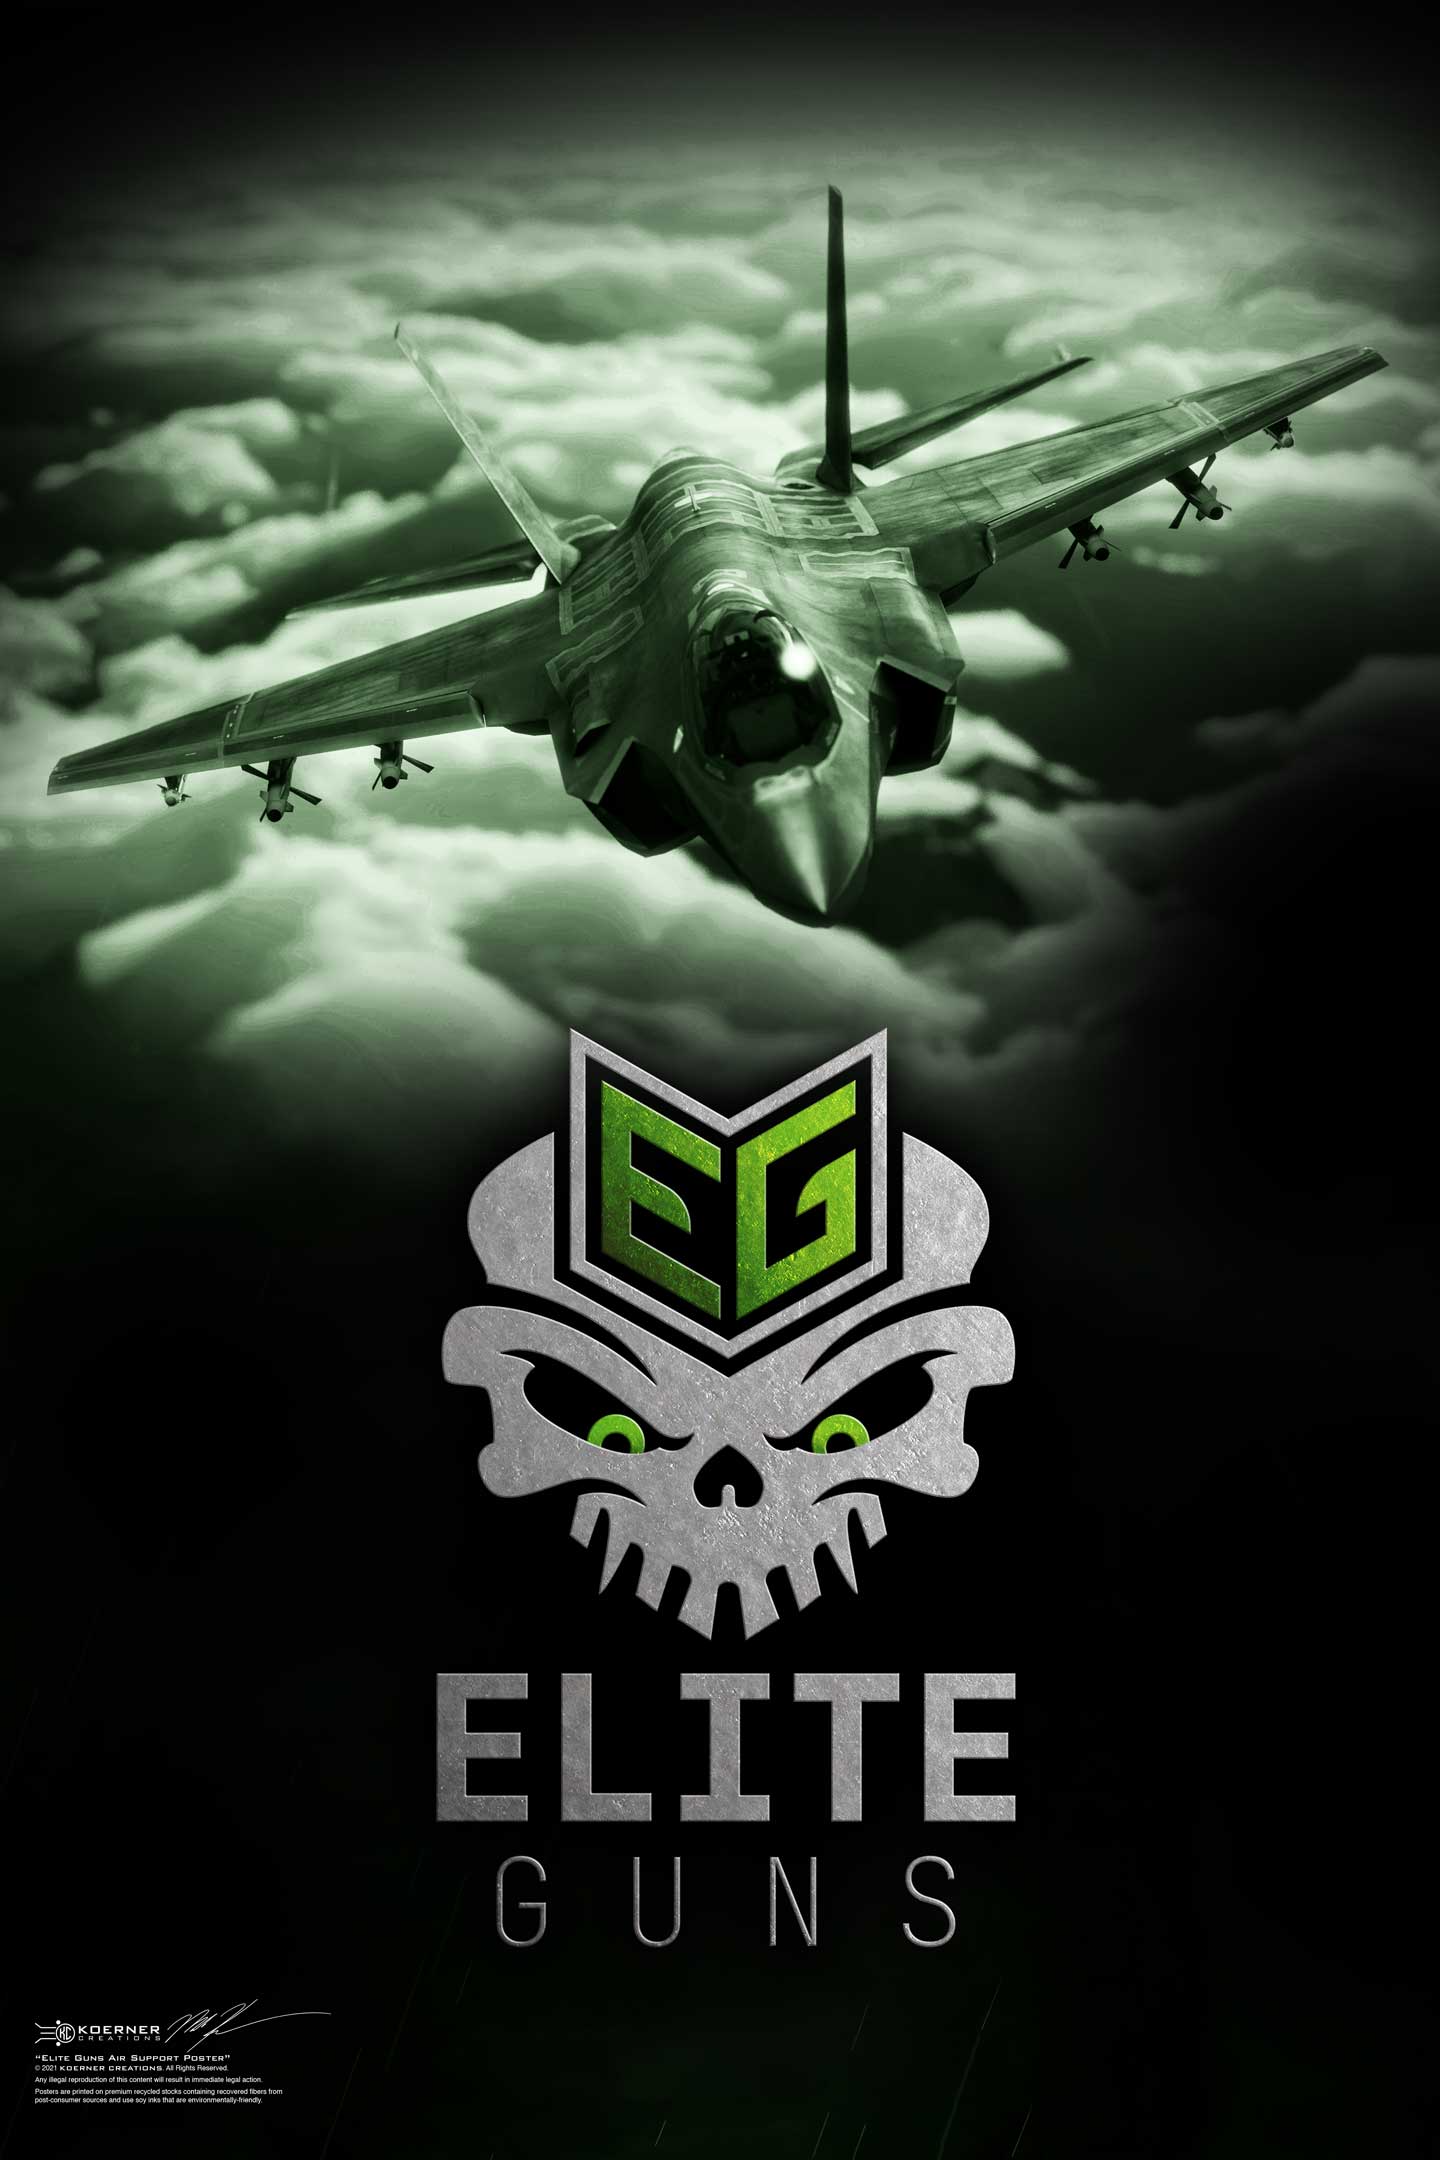 Elite Guns Store Poster (Target Acquired)